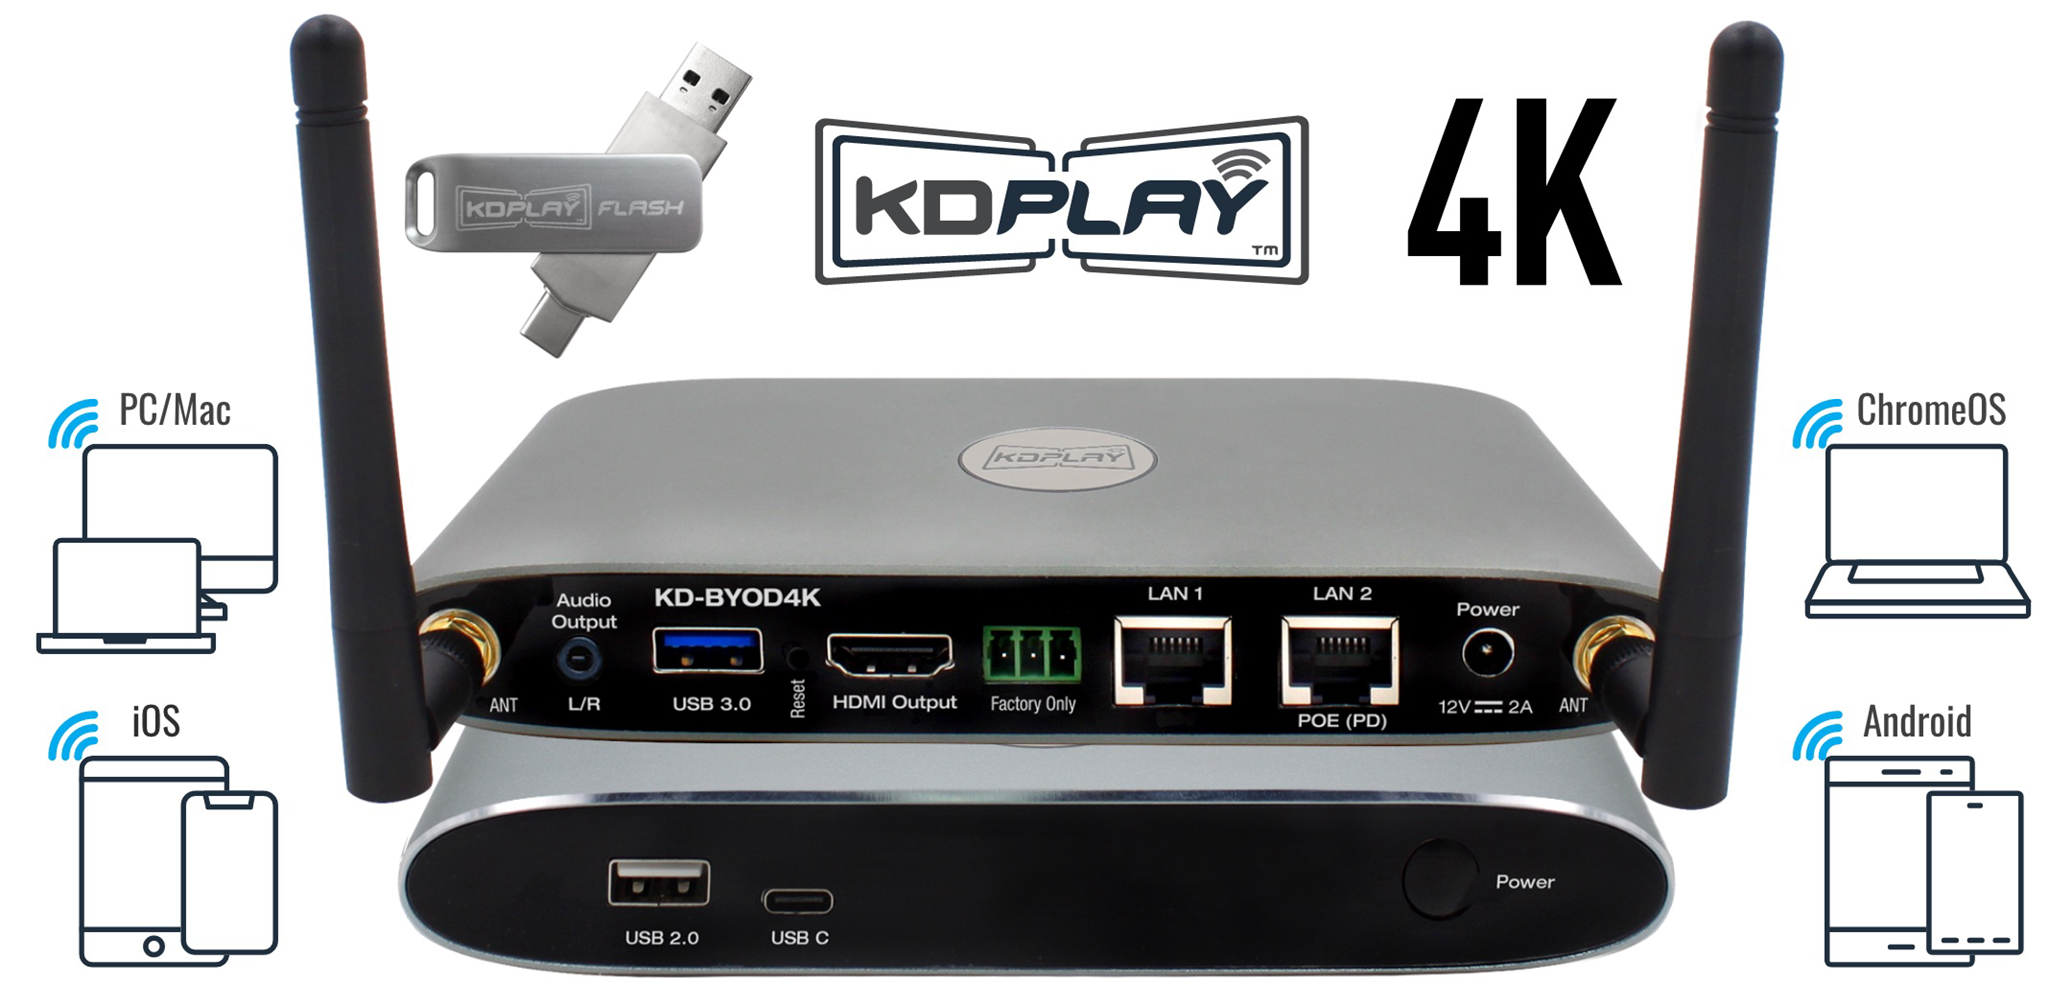 4K KDPlay Wireless Presentation Gateway for PC, Mac, iOS, Android and Chrome OS devices _ KD-BYOD4K